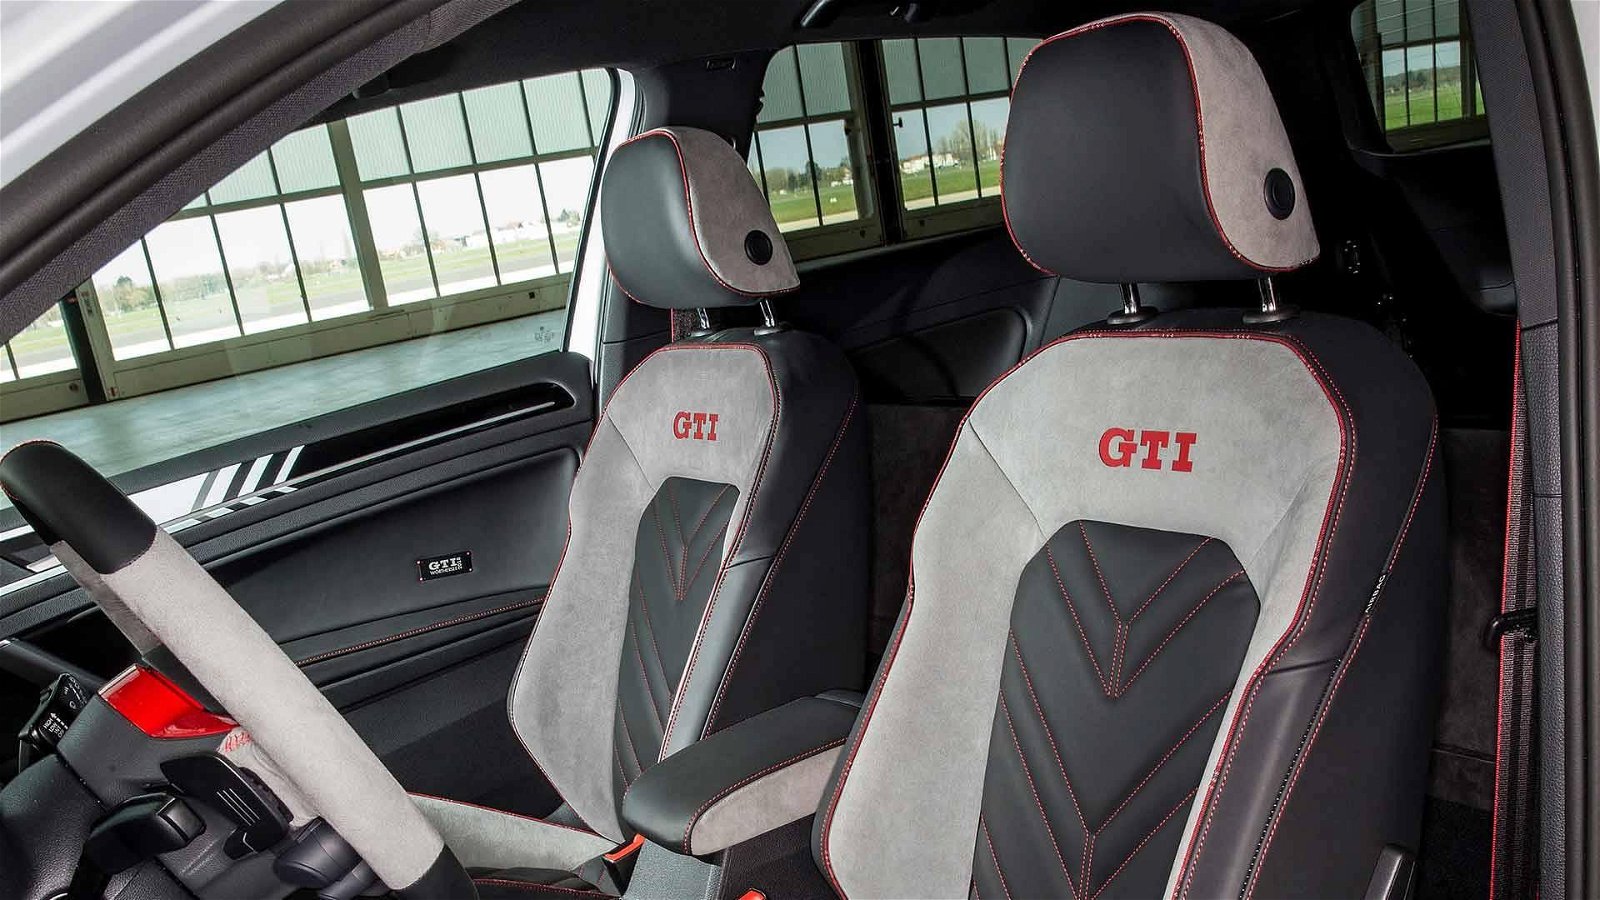 Golf GTI Next Level and Estate Emotion 22